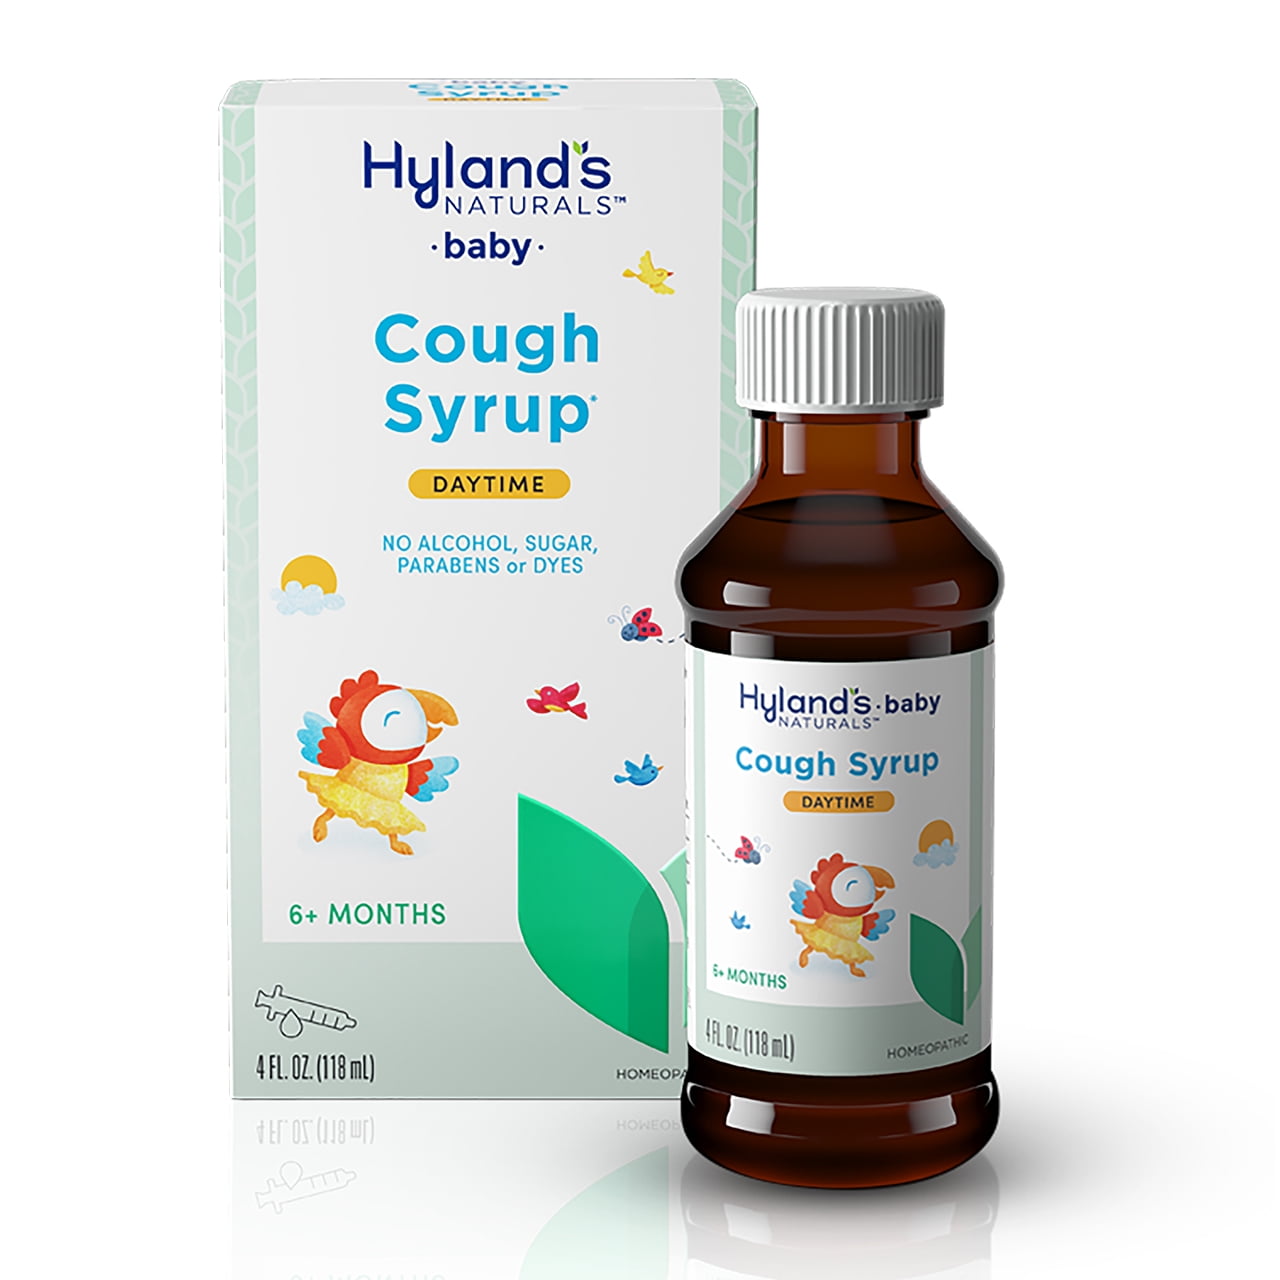 Hyland's Naturals Baby Cough Syrup, Natural Relief of Coughs Due to